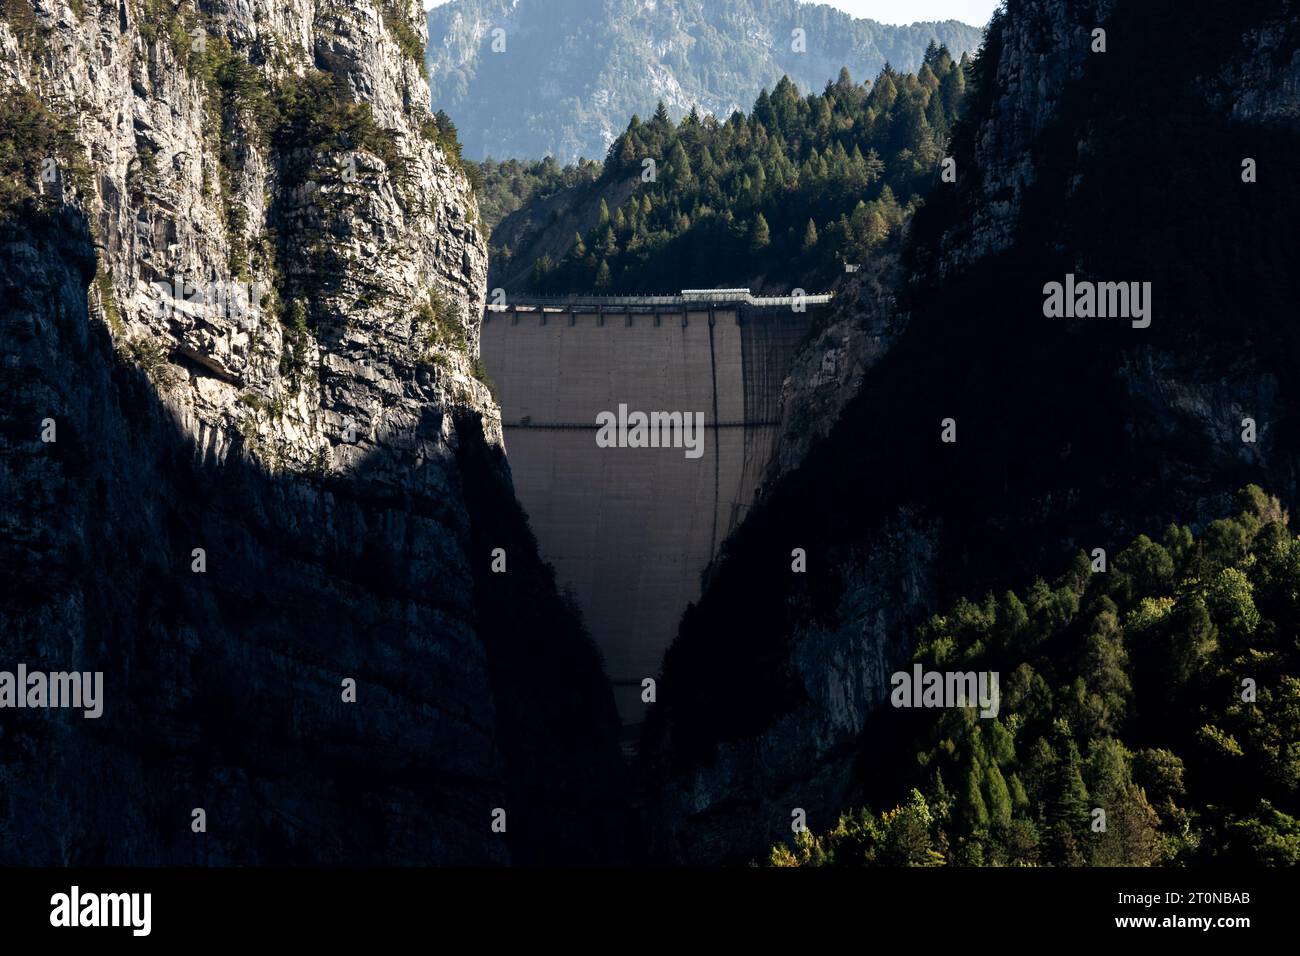 In the gorge of the Vajont torrent, the imposing structure of the dam is pictured. Stock Photo